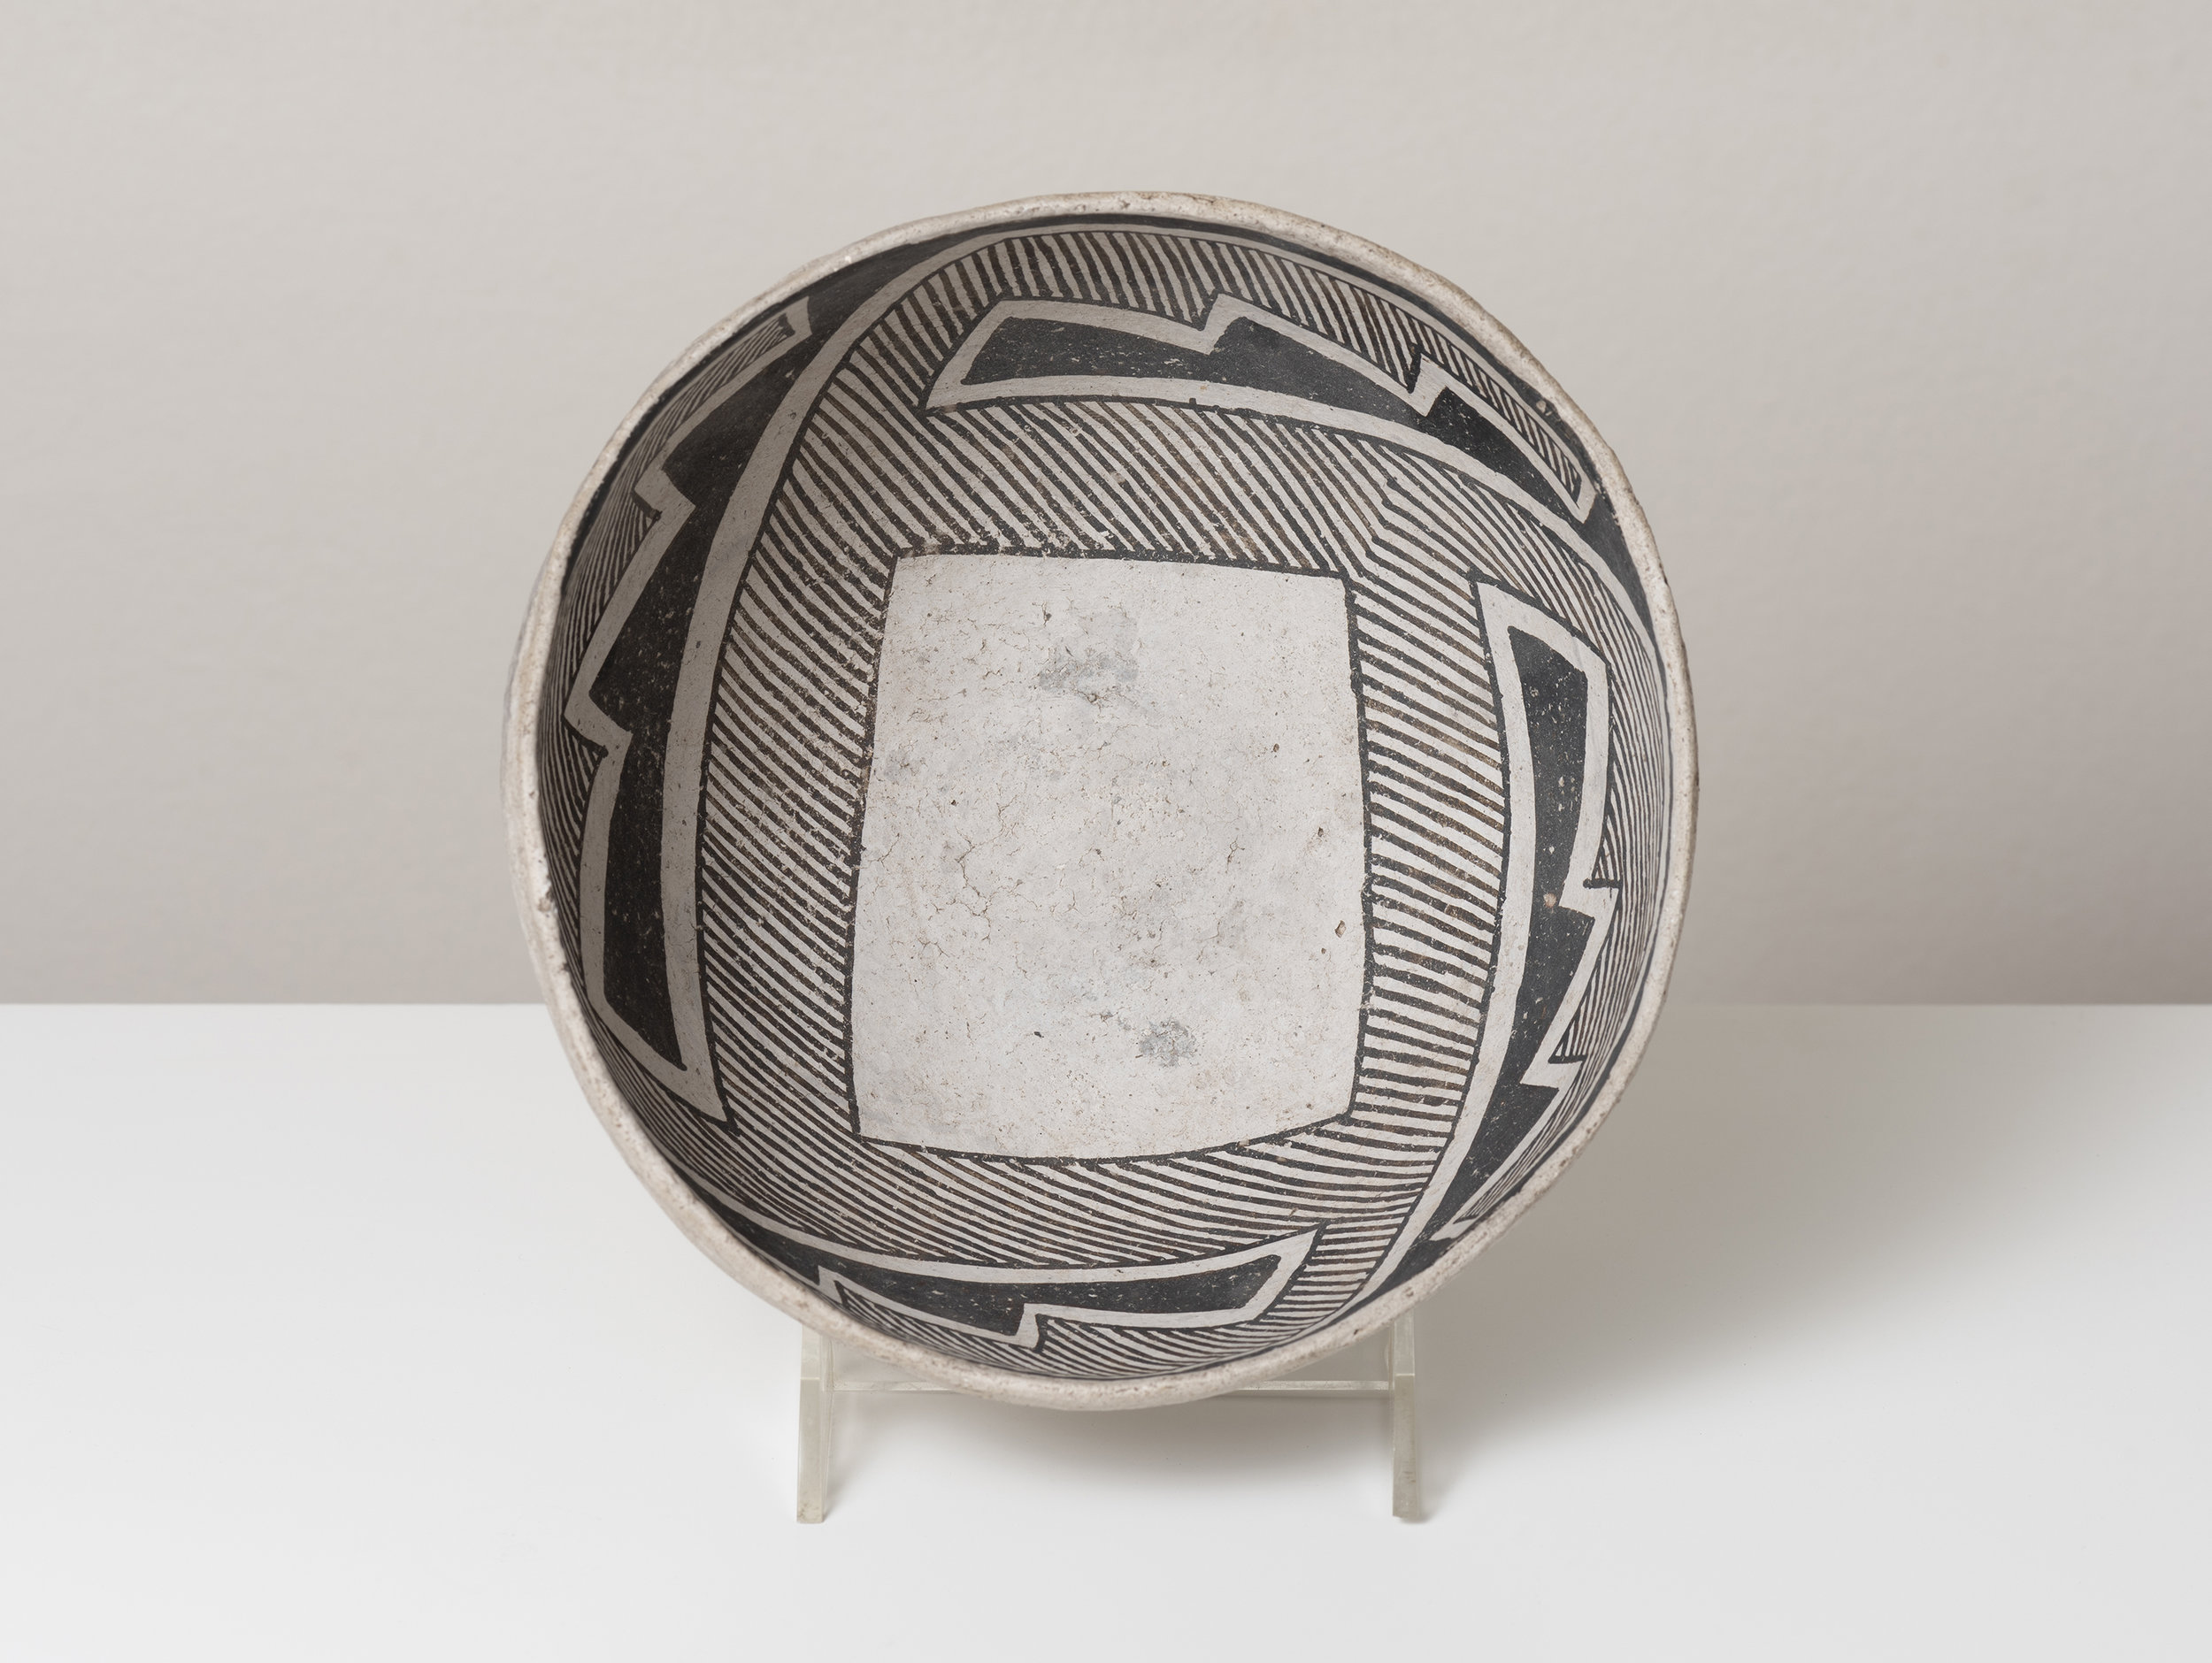   Socorro Black-on-white  Trance portal / directional abstraction c. 1100 - 1300 CE Painted ceramic 7 inches diameter, 4 inches depth 